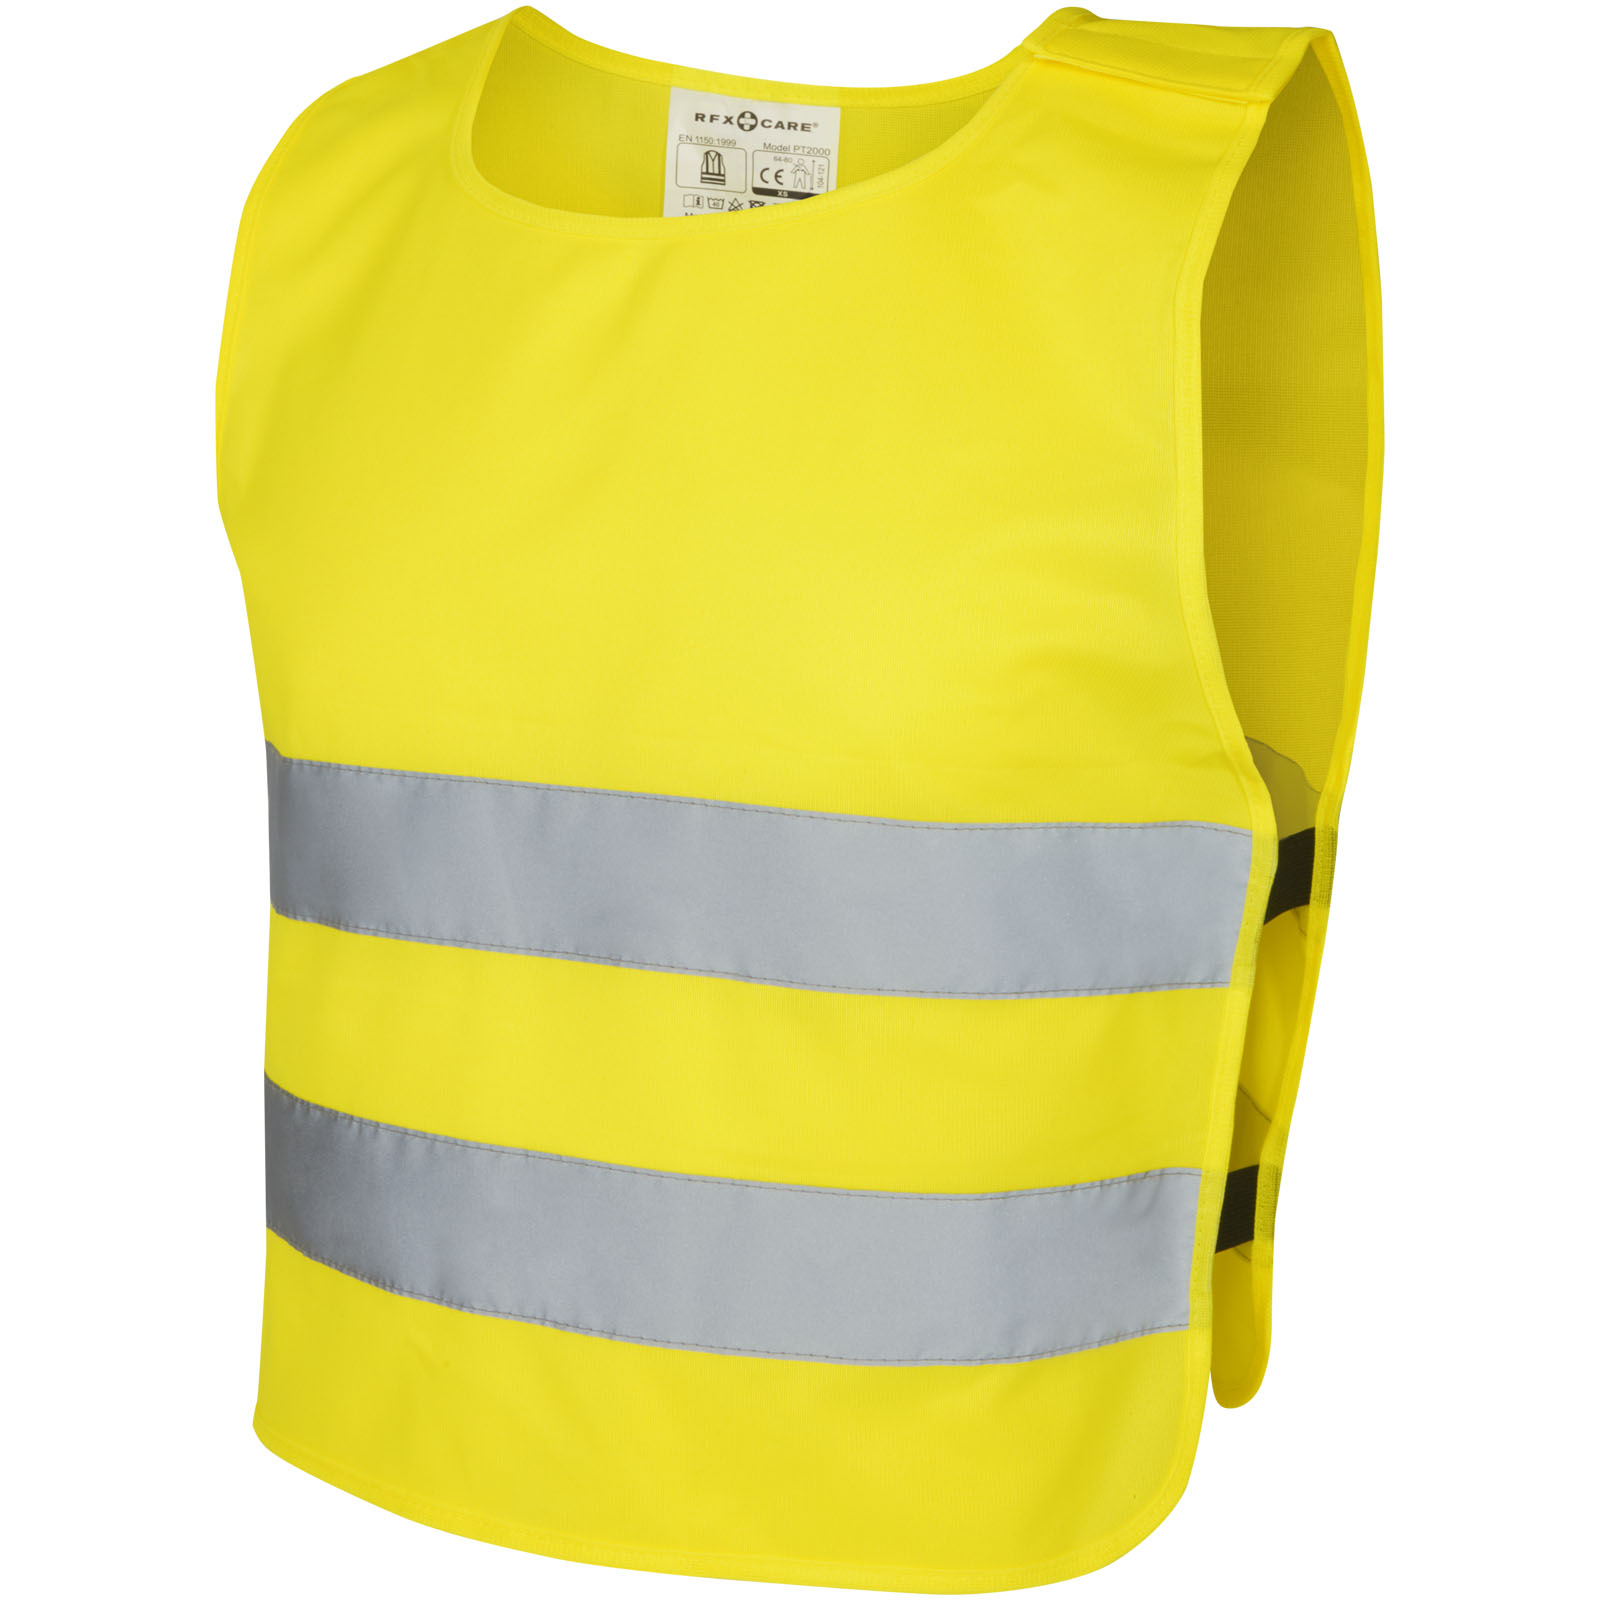 Advertising Reflective Items - RFX™ Ingeborg safety and visibility set for childeren 7-12 years - 2